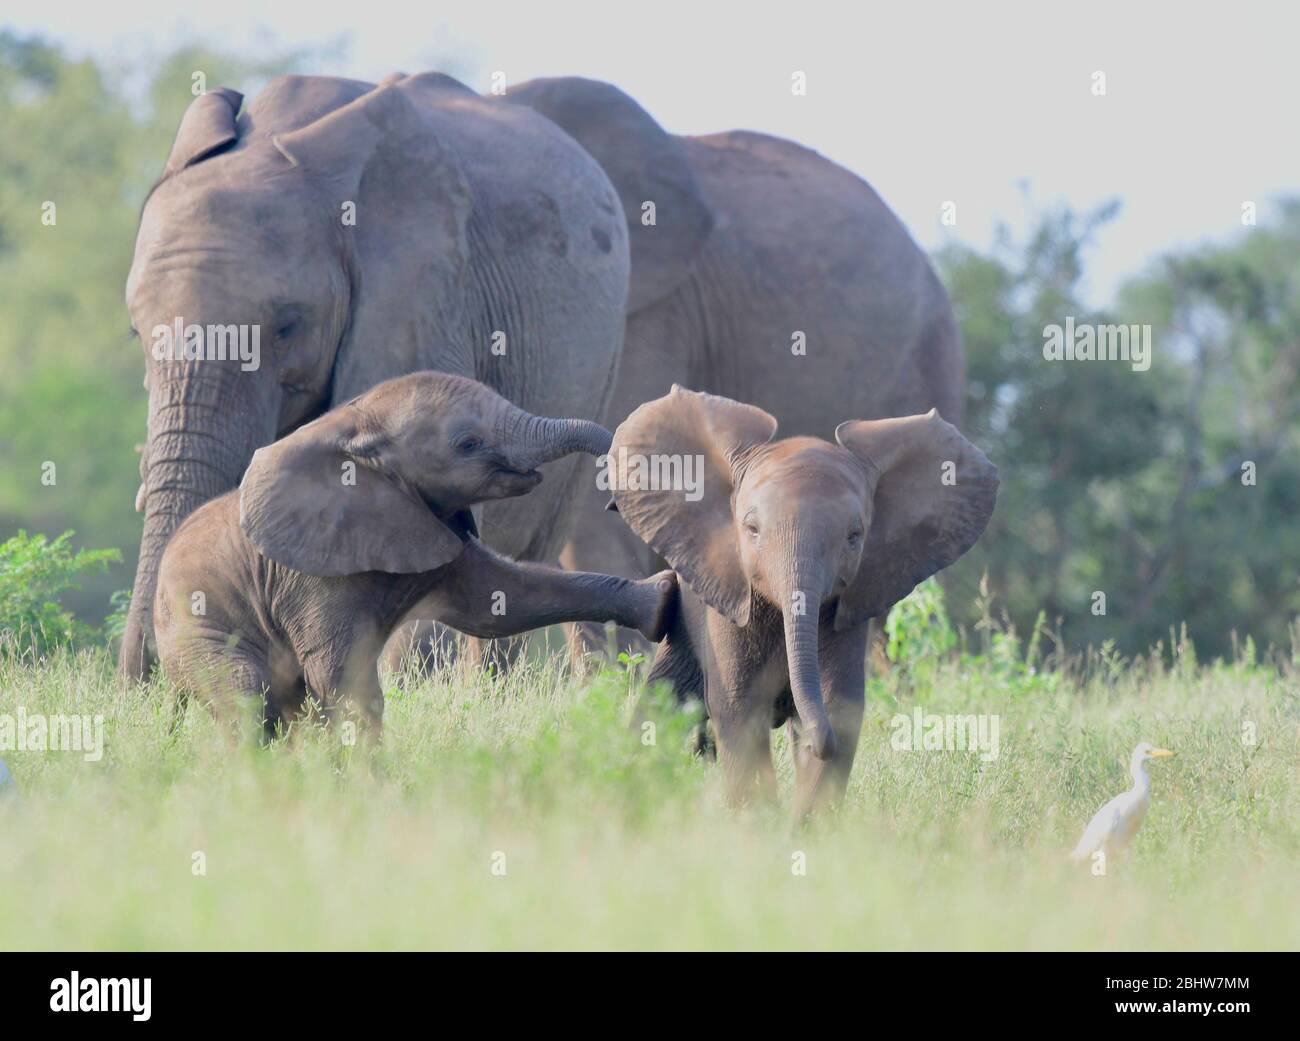 Two baby elephants kicking and playing with mom keeping an eye on them Stock Photo